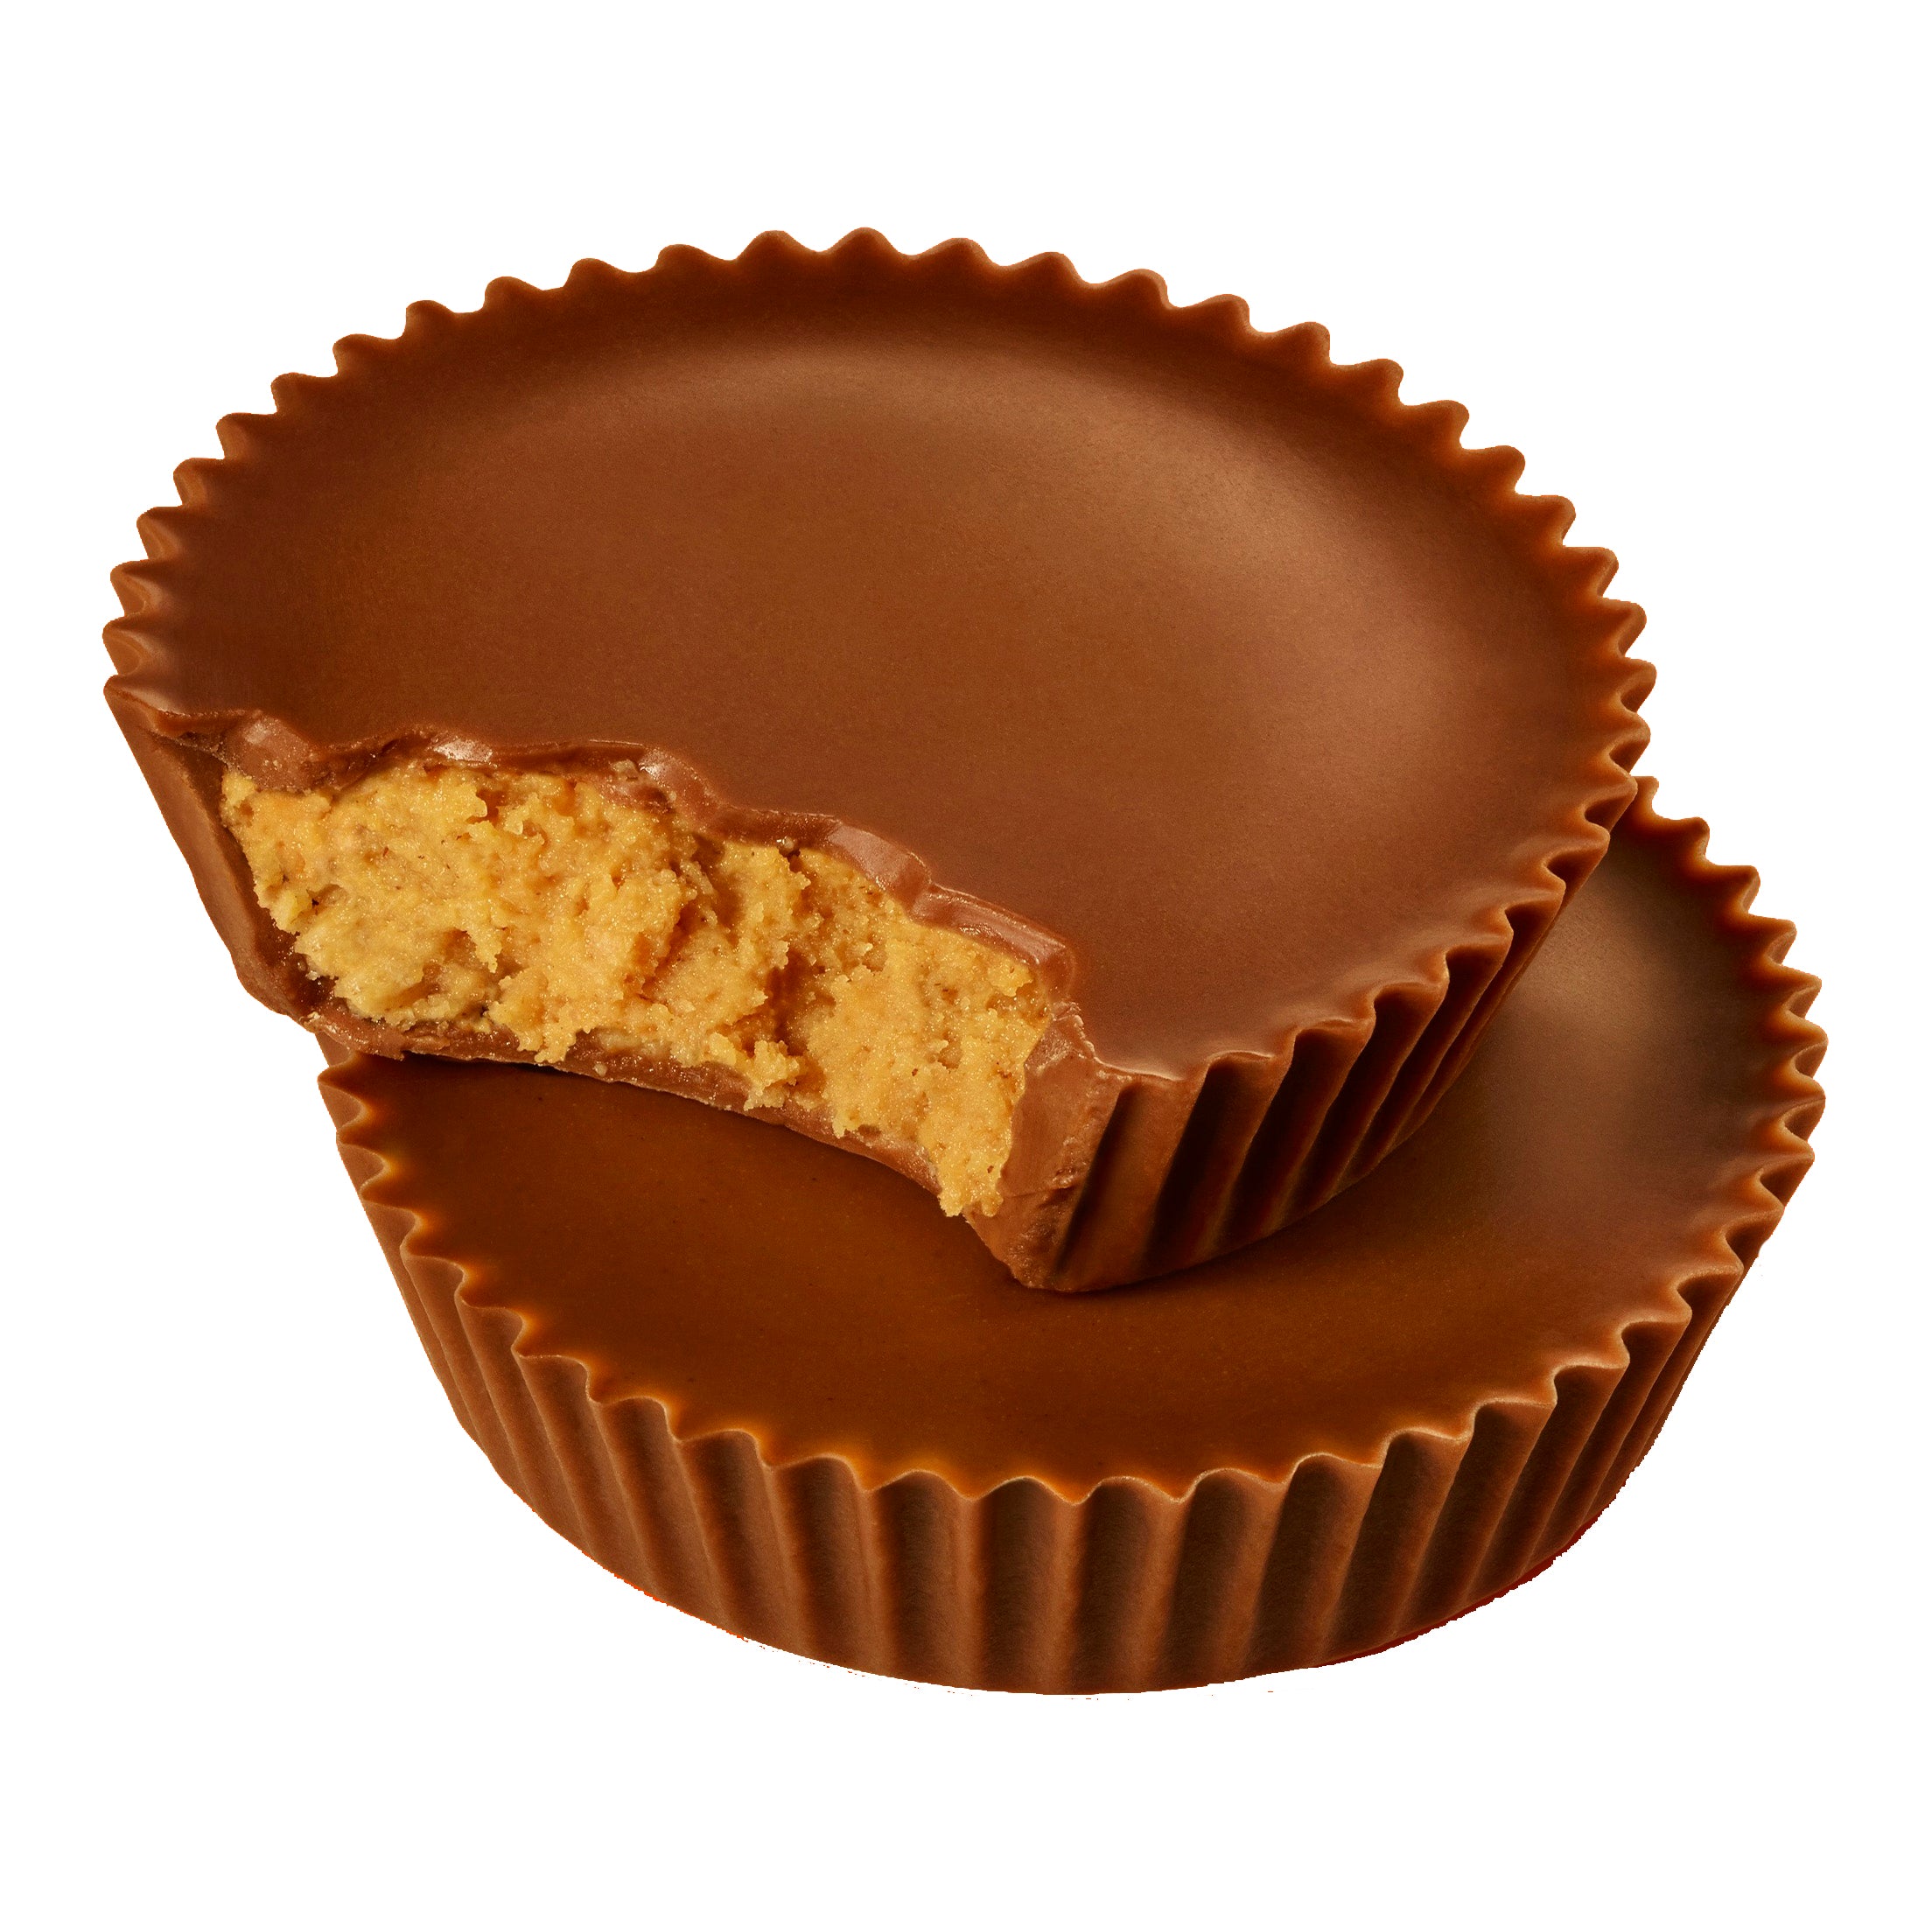 Reese's 2 Peanut Butter Cups My American Shop